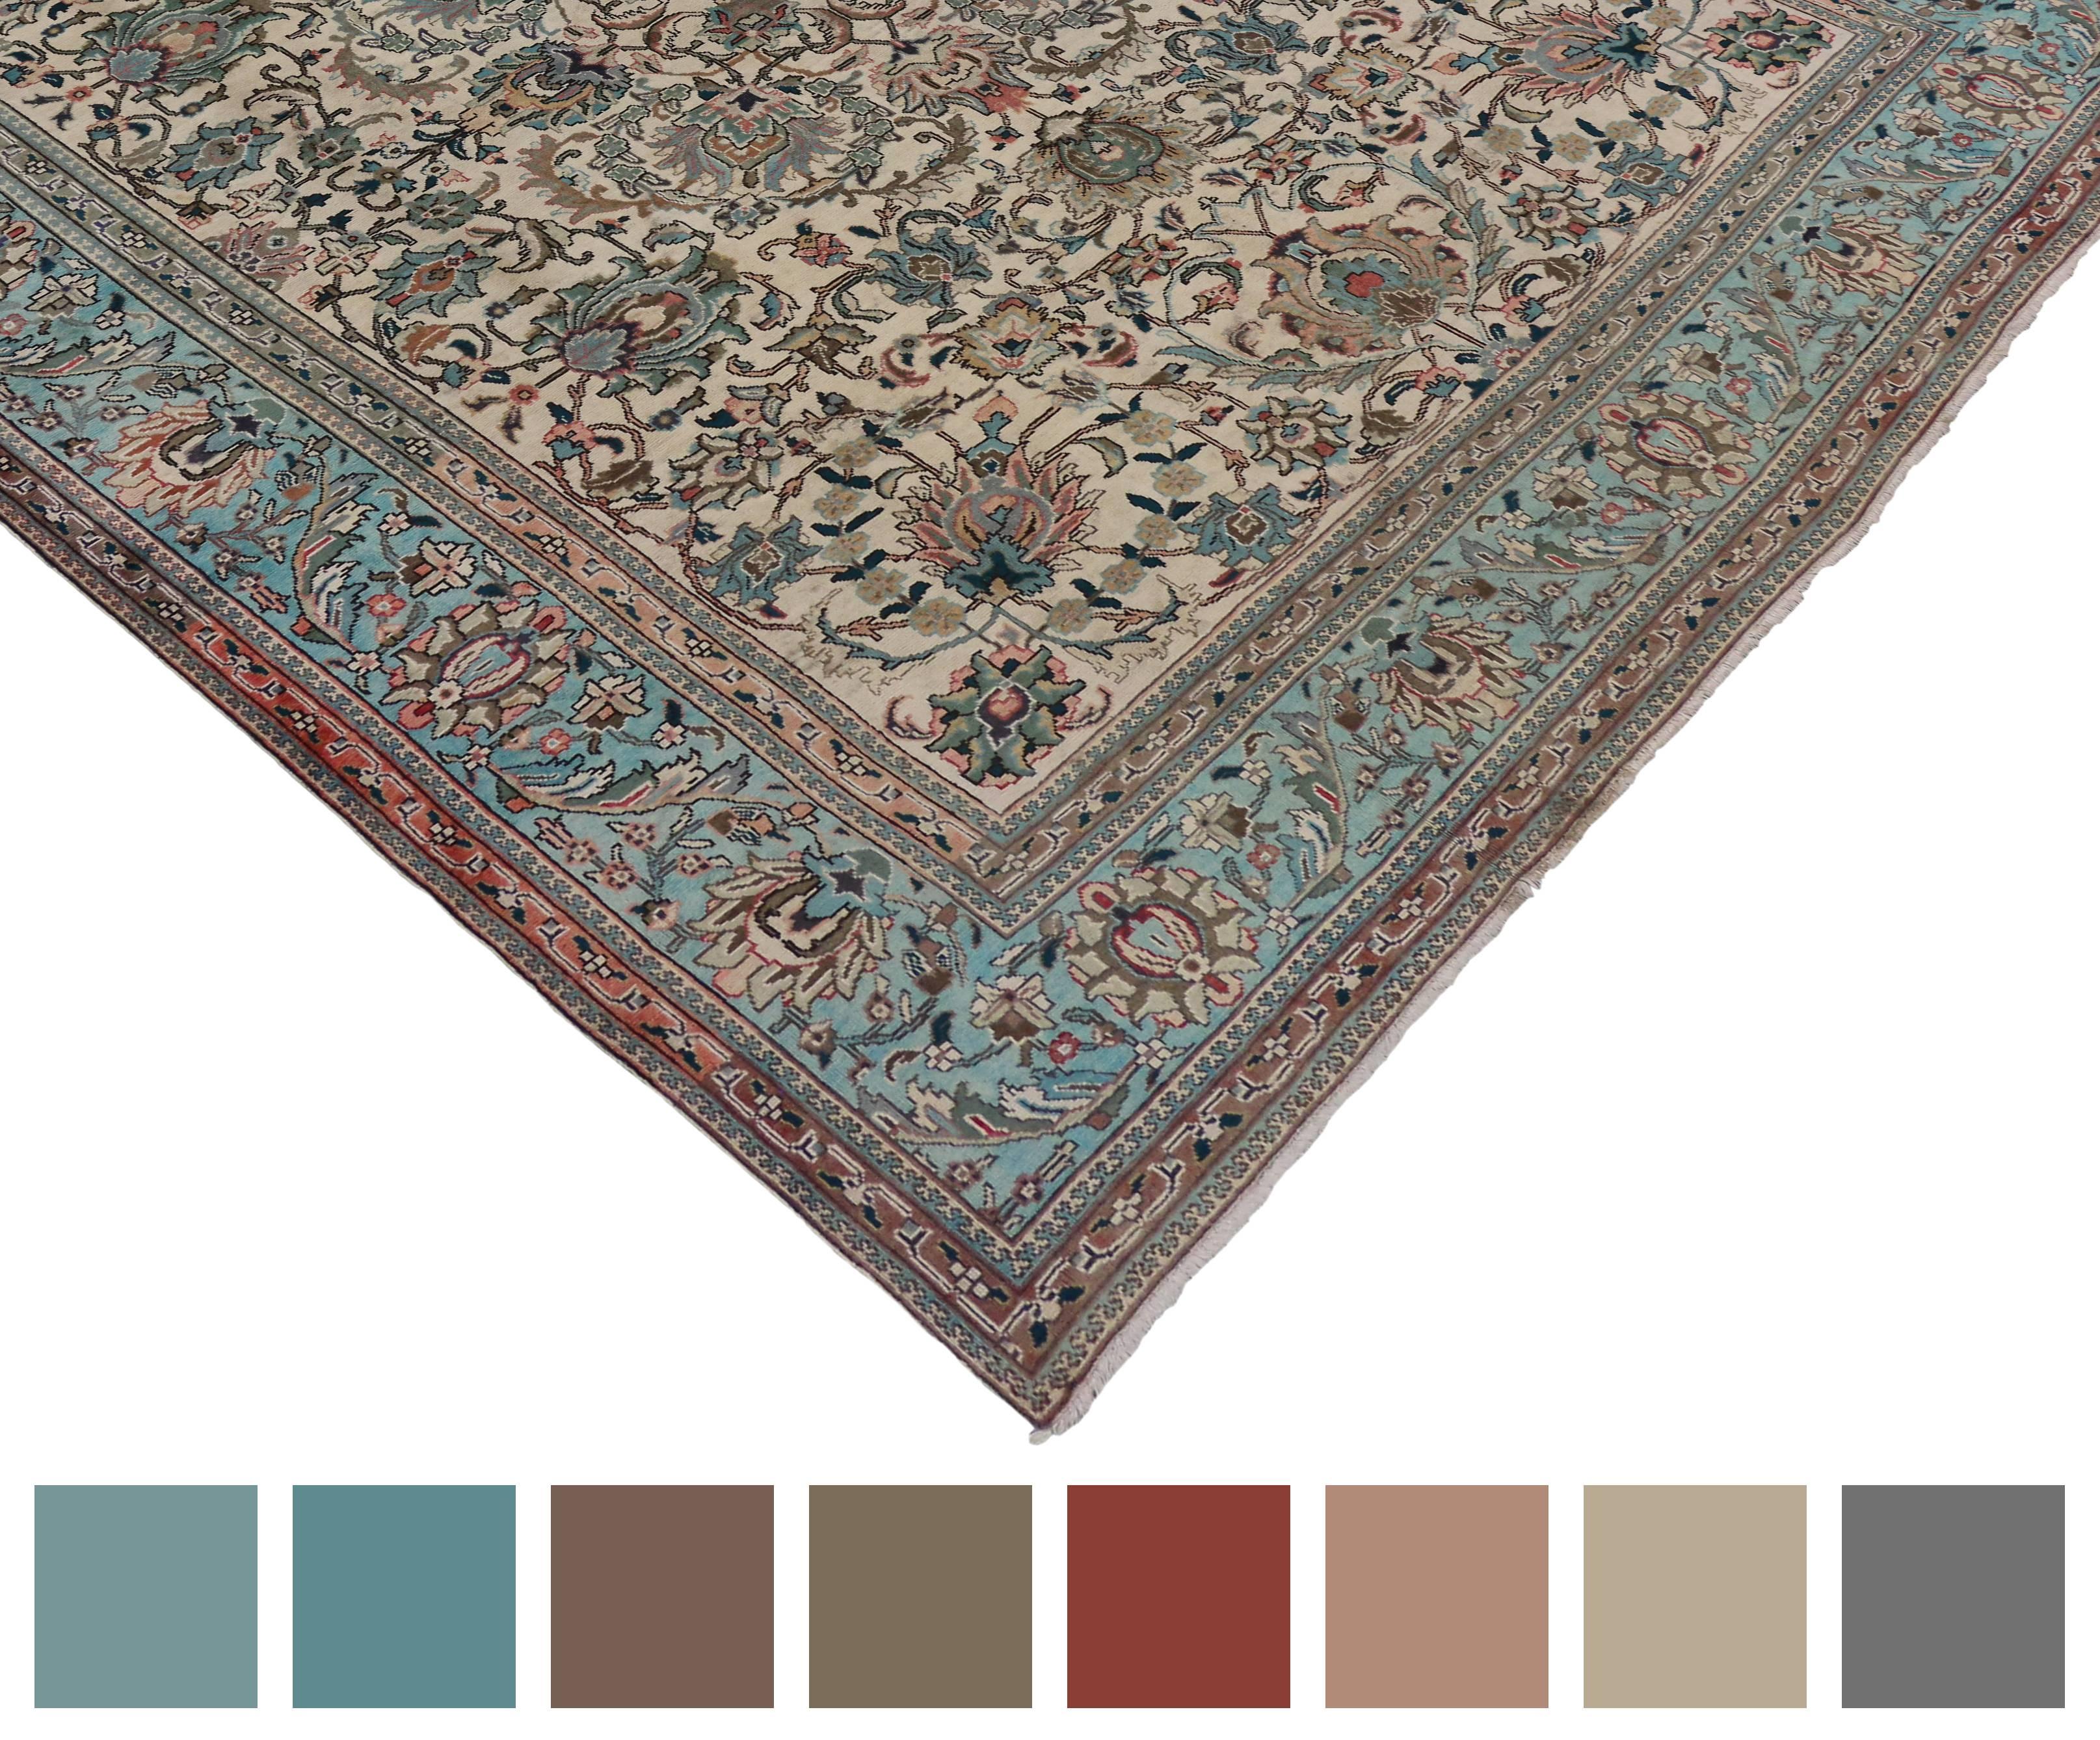 Timeless and refined, this vintage light blue Persian Tabriz rug features a Hampton's Chic style. The vanilla-cream field is surrounded by all-over florals, motifs and arabesque vines abundantly flow creating a well-balanced design. A light aqua